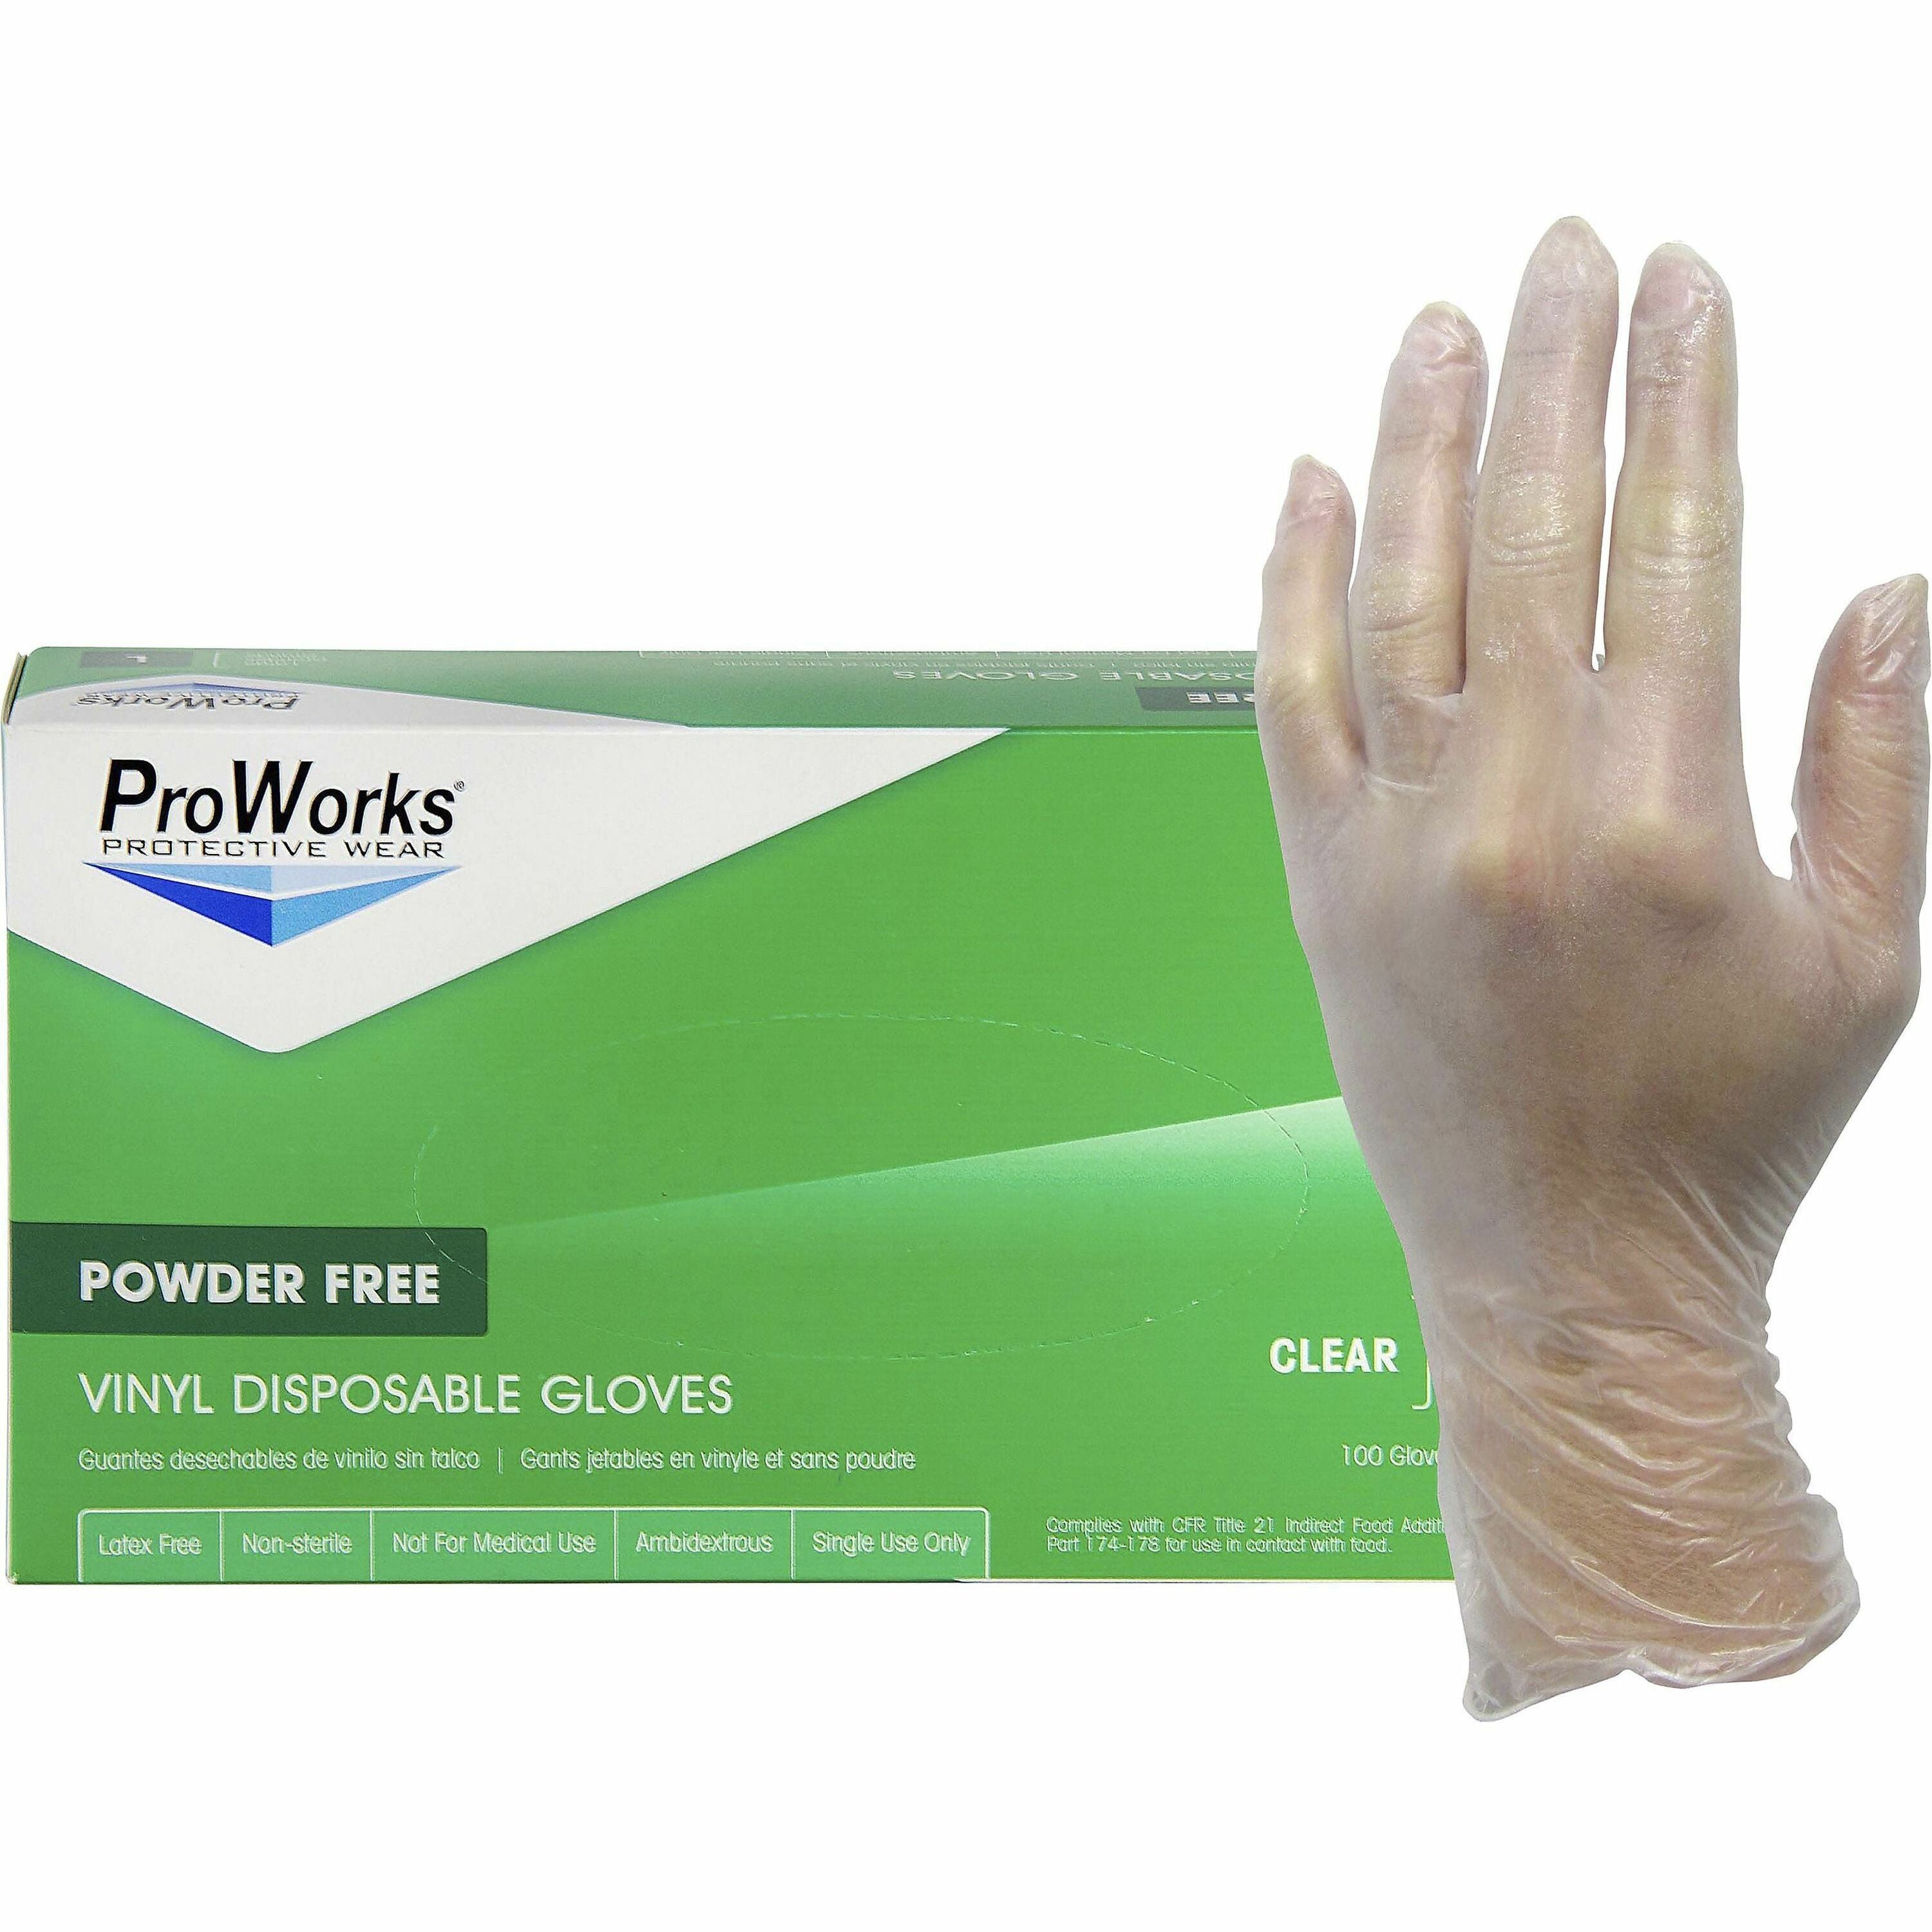 ProWorks Vinyl Industrial Gloves - X-Large Size - Vinyl - Clear - Non-sterile - For Industrial, Food Processing, Construction, Food Service, Hospitality, General Purpose - 100 / Box - 3 mil Thickness - 9" Glove Length